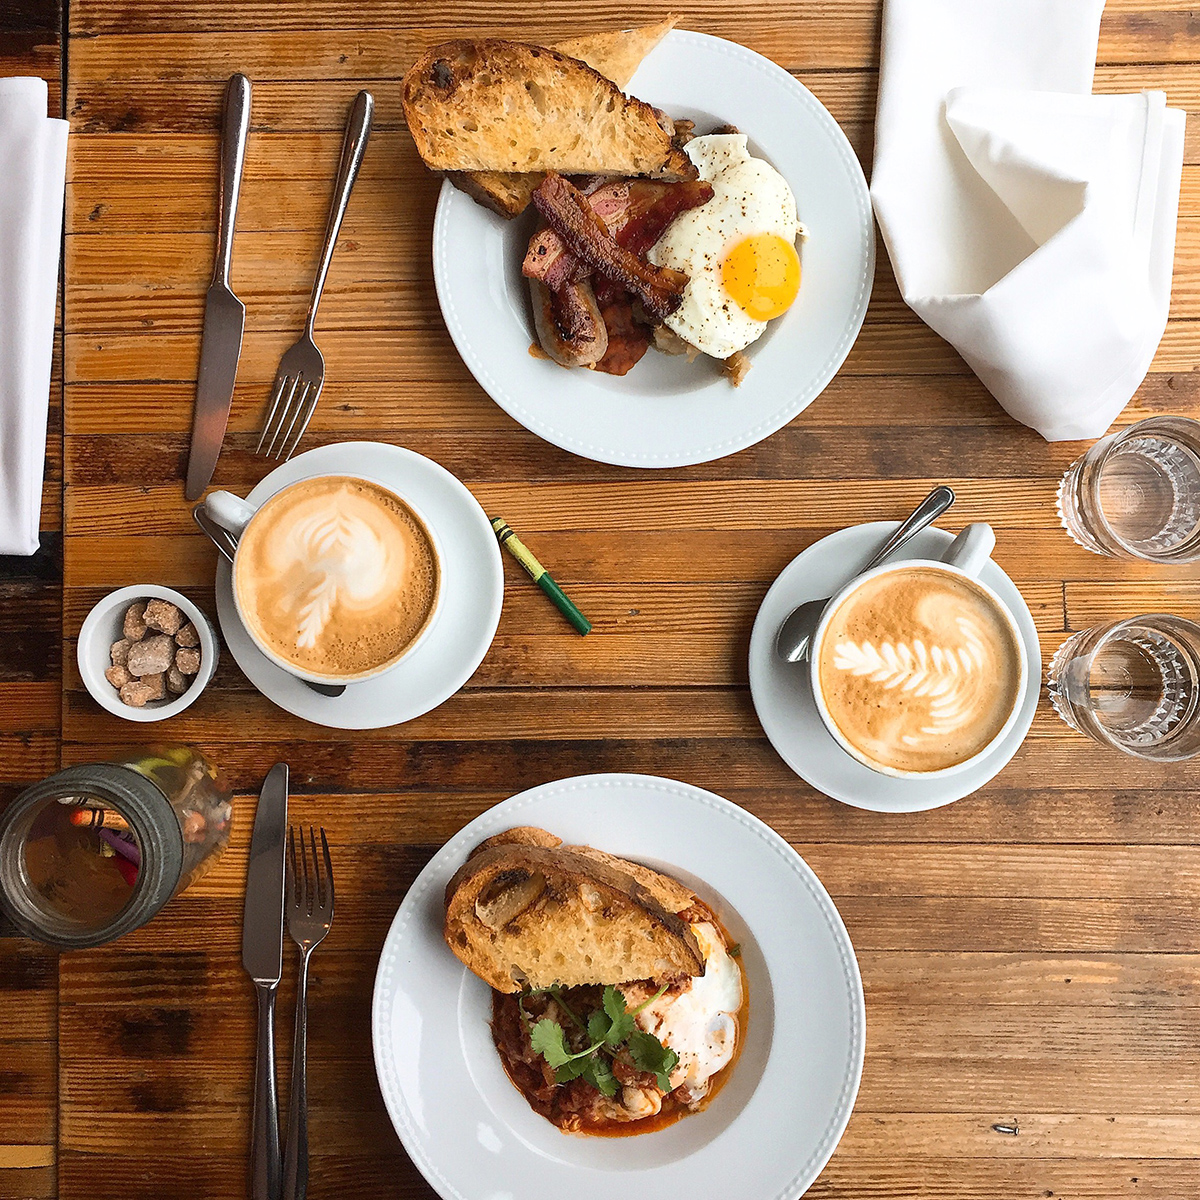 lawrence brunch restaurant montreal © Will Travel for Food